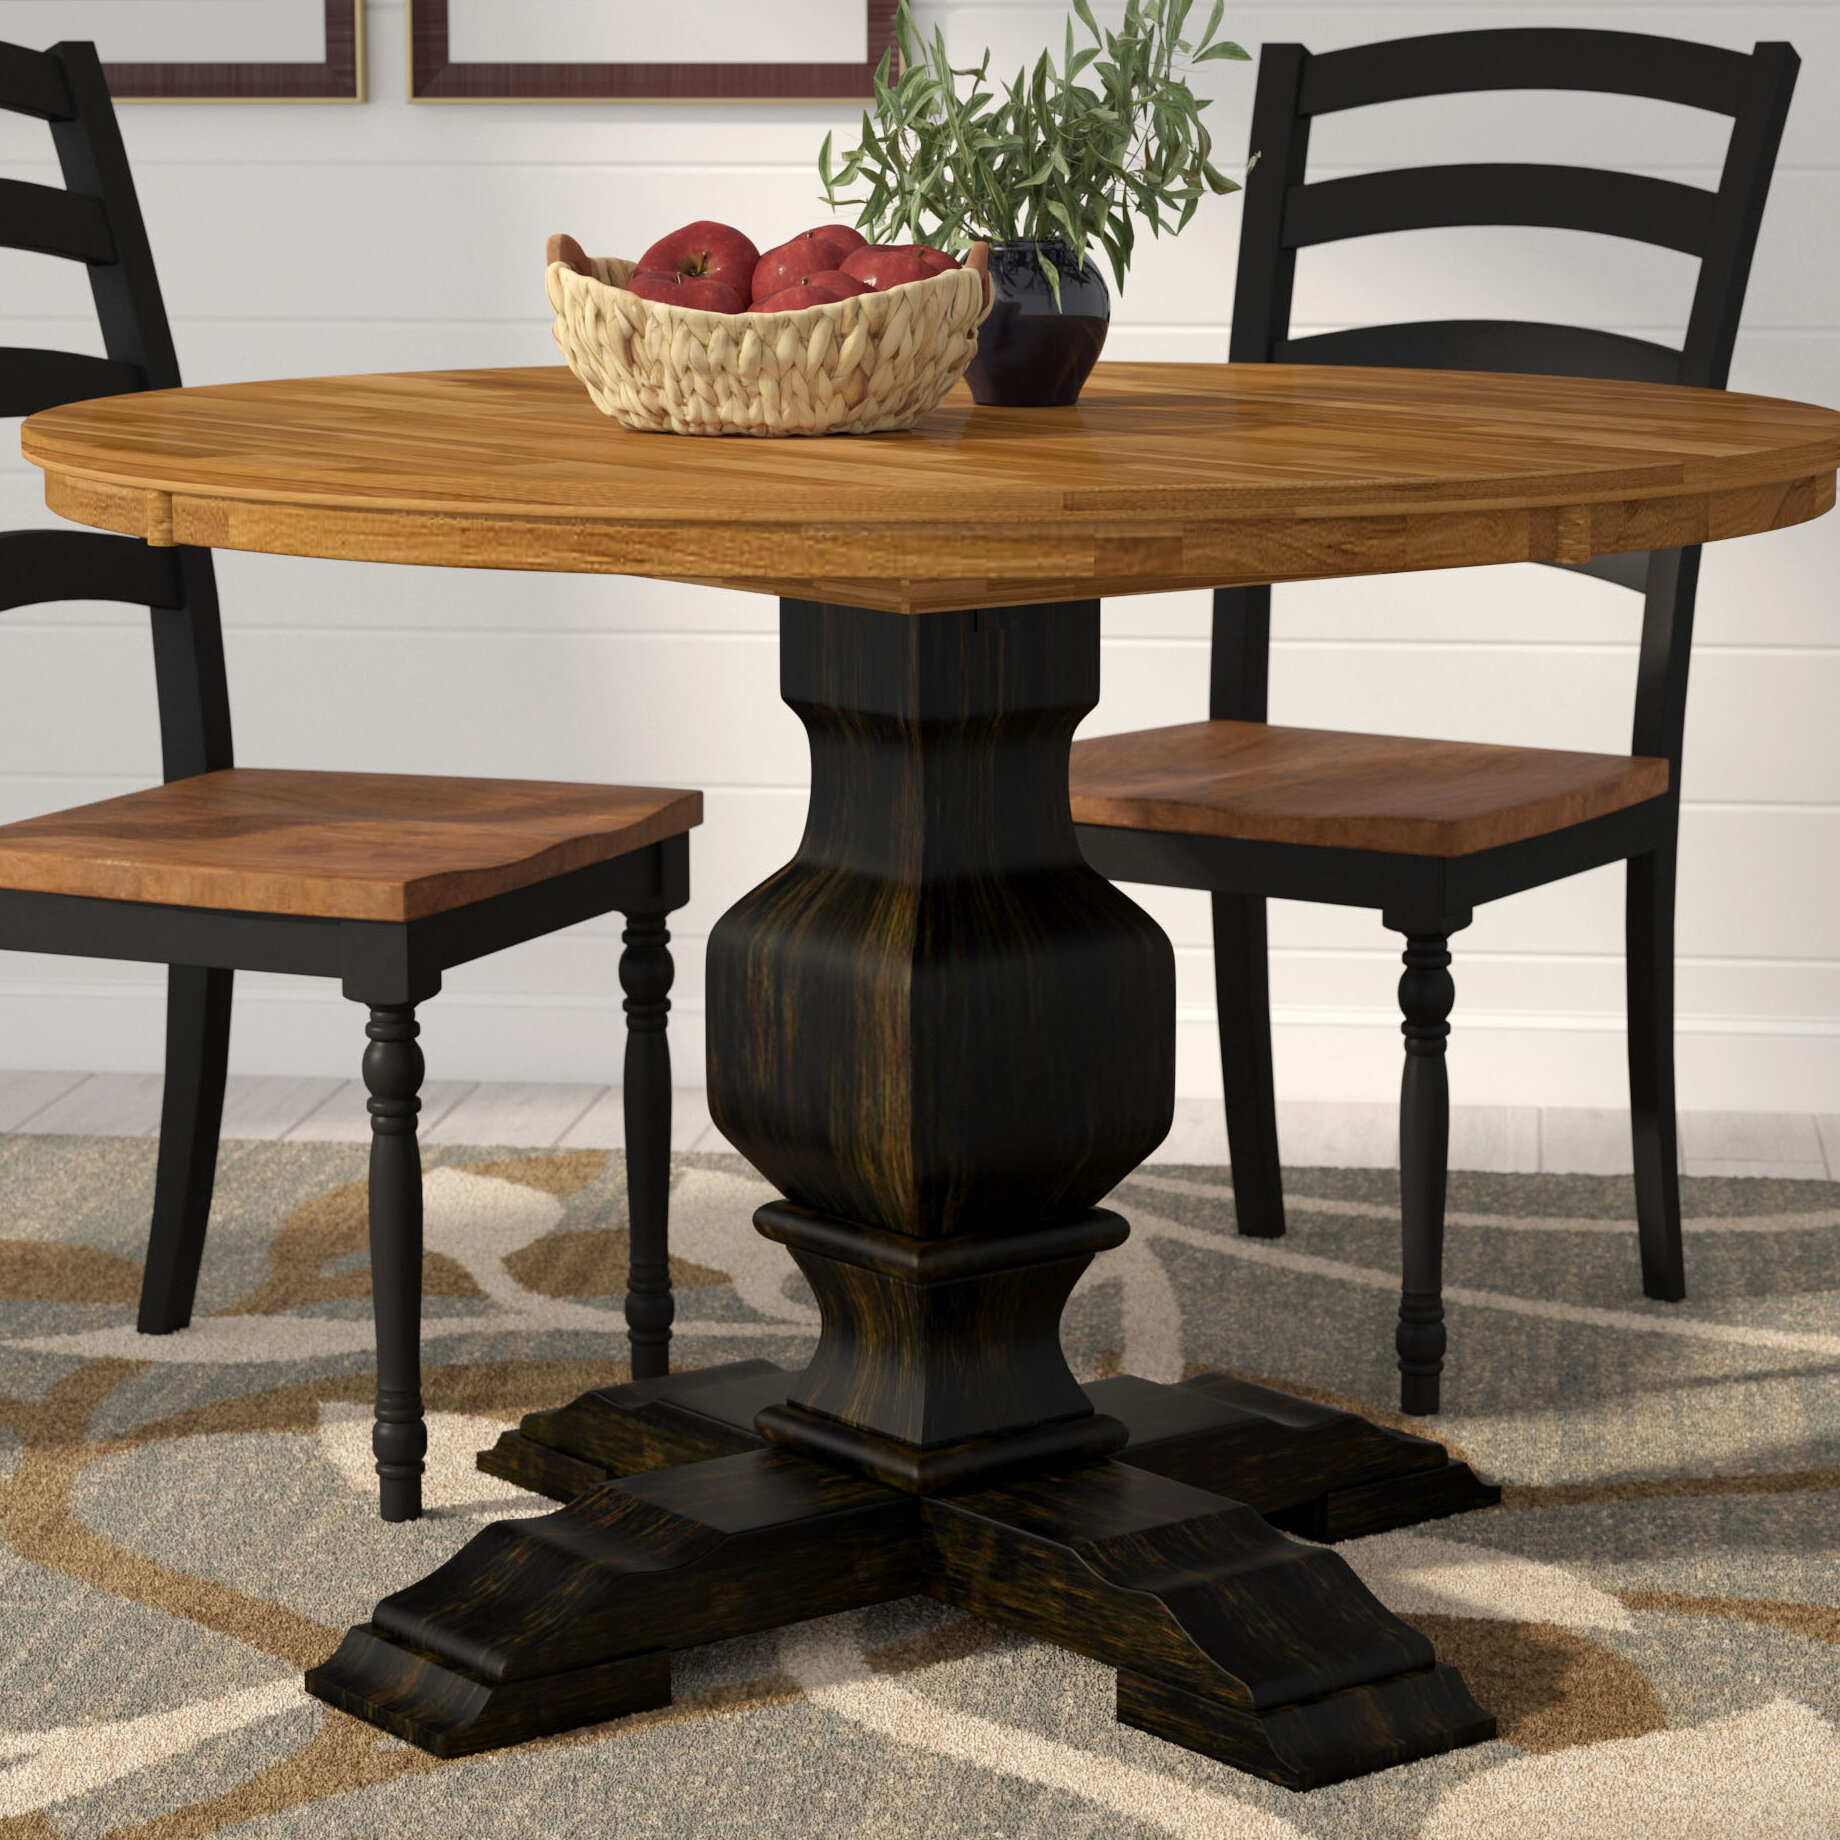 48 Inch Round Dining Table You Ll Love, 48 Inch Round Dining Table Set With Leaf